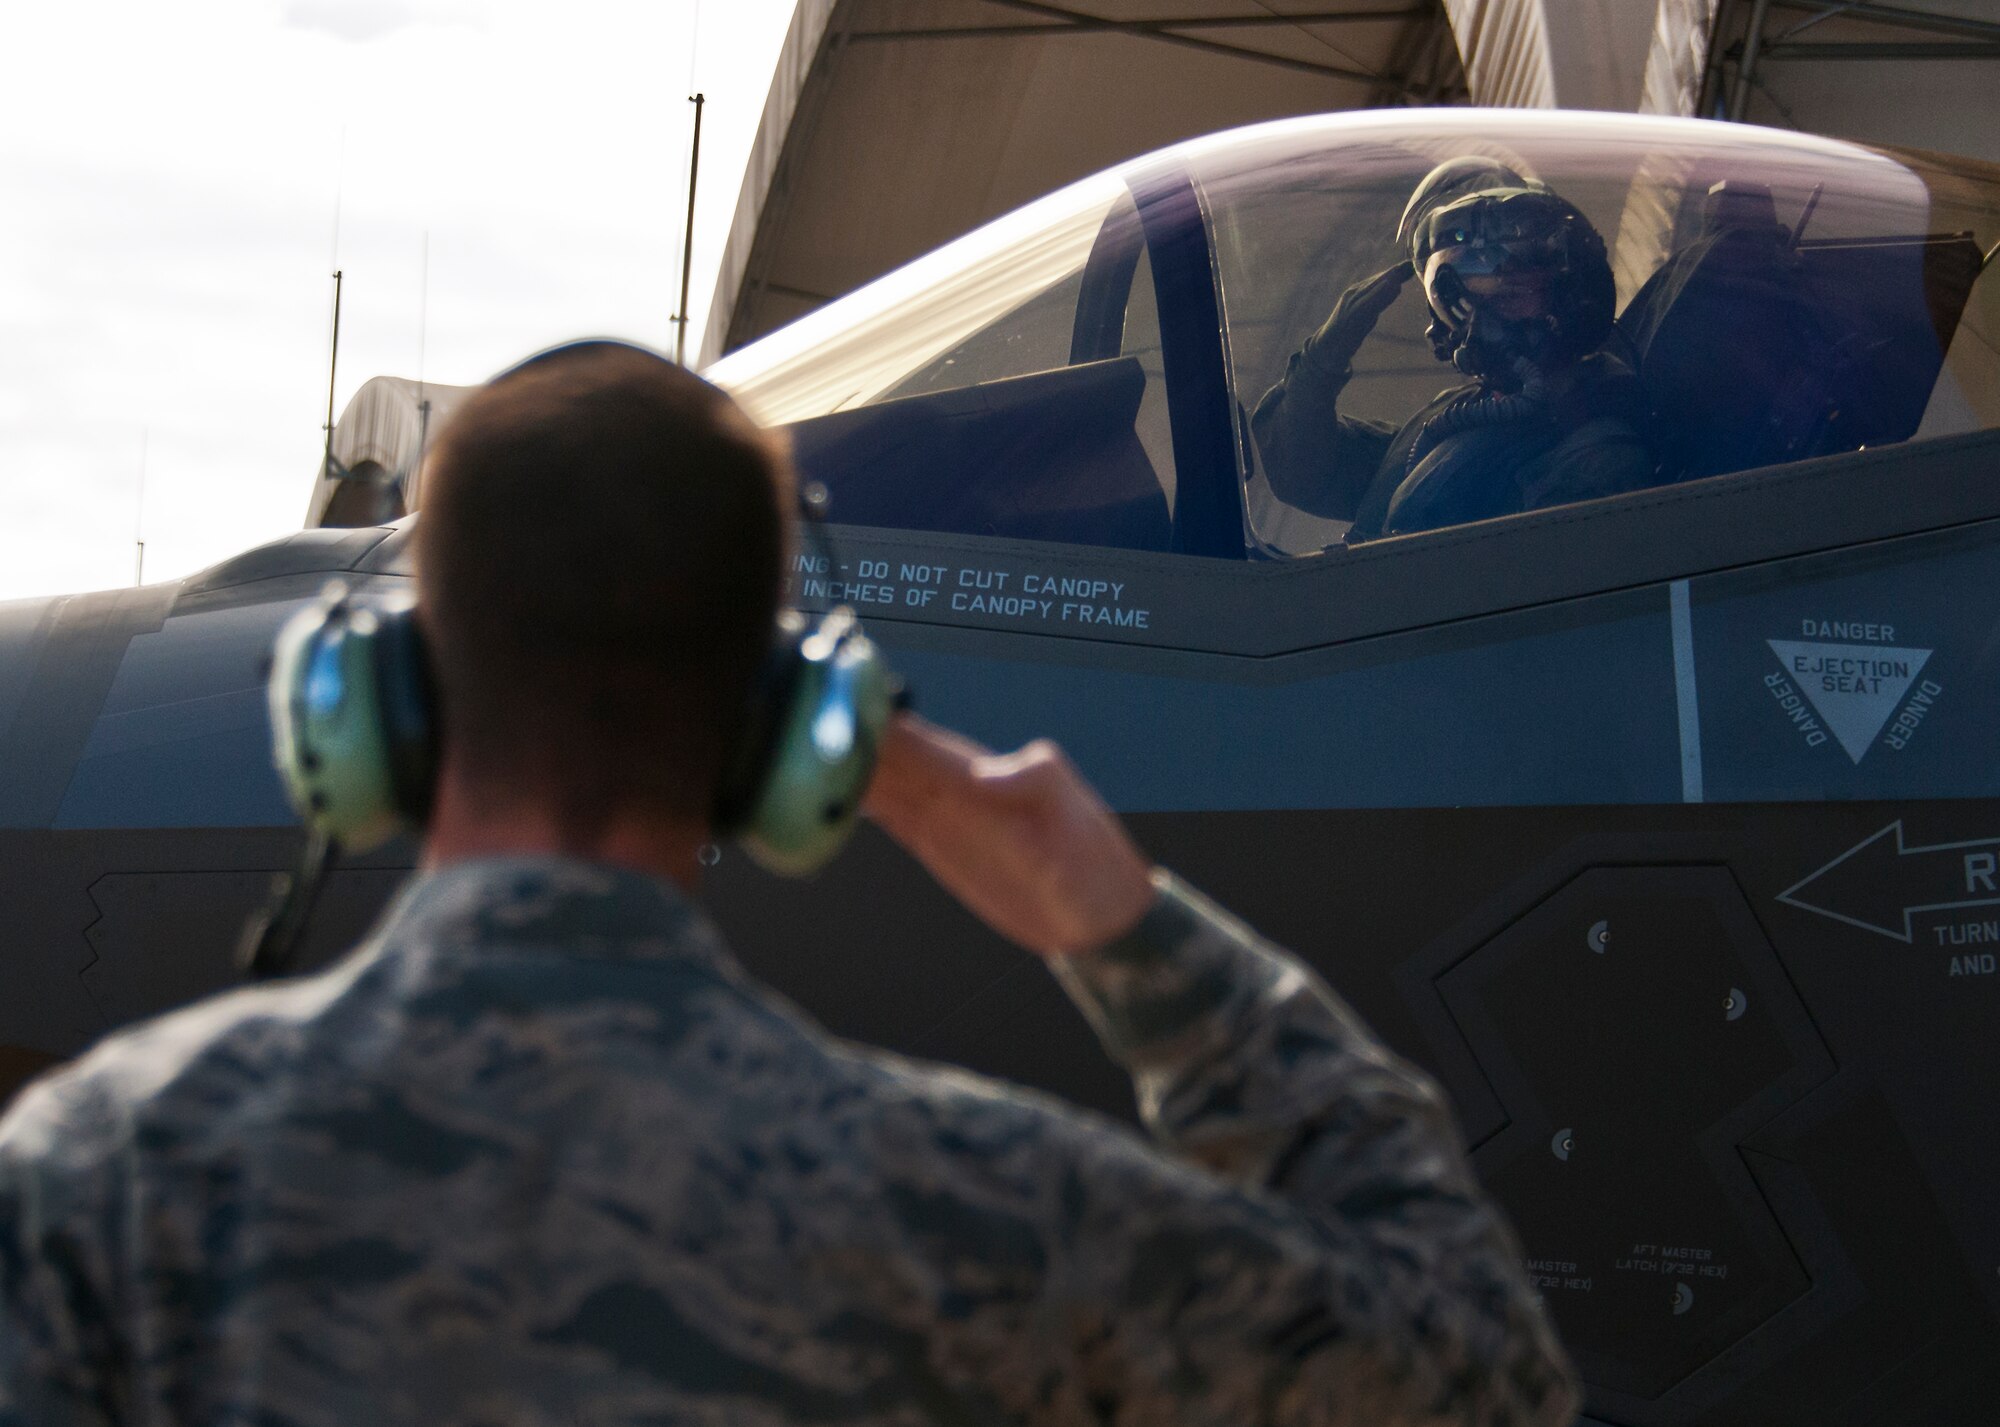 Maj. Gen. Jay Silveria, U. S. Air Force Warfare Center commander, salutes his crew chief, Airman 1st Class John Patterson, 33rd Aircraft Maintenance Squadron, as he begins taxiing for his final qualifying flight in the F-35A Lightning II Sept. 26 at Eglin Air Force Base, Fla.  Silveria became the first general officer in the Department of Defense to qualify in the fifth generation fighter.  He completed his training with back-to-back flights and hot pit refueling.  (U.S. Air Force photo/Samuel King Jr.)